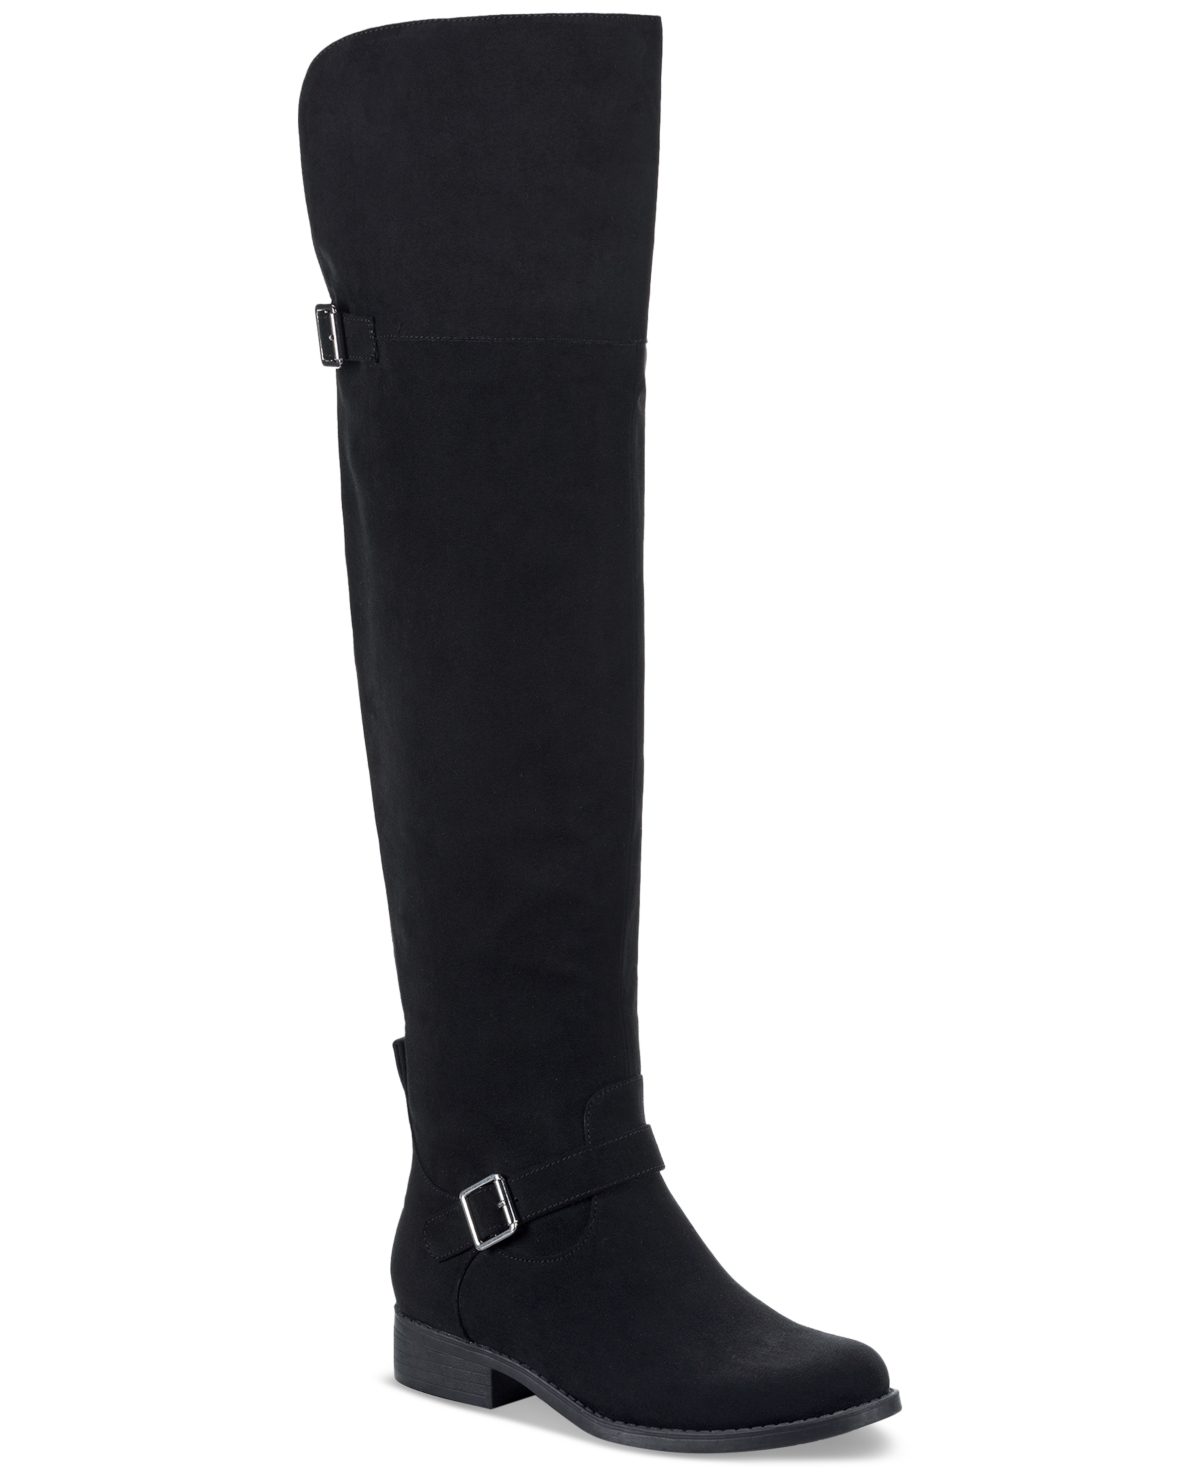 Anyaa Over-The-Knee Boots, Created for Macy's - Black